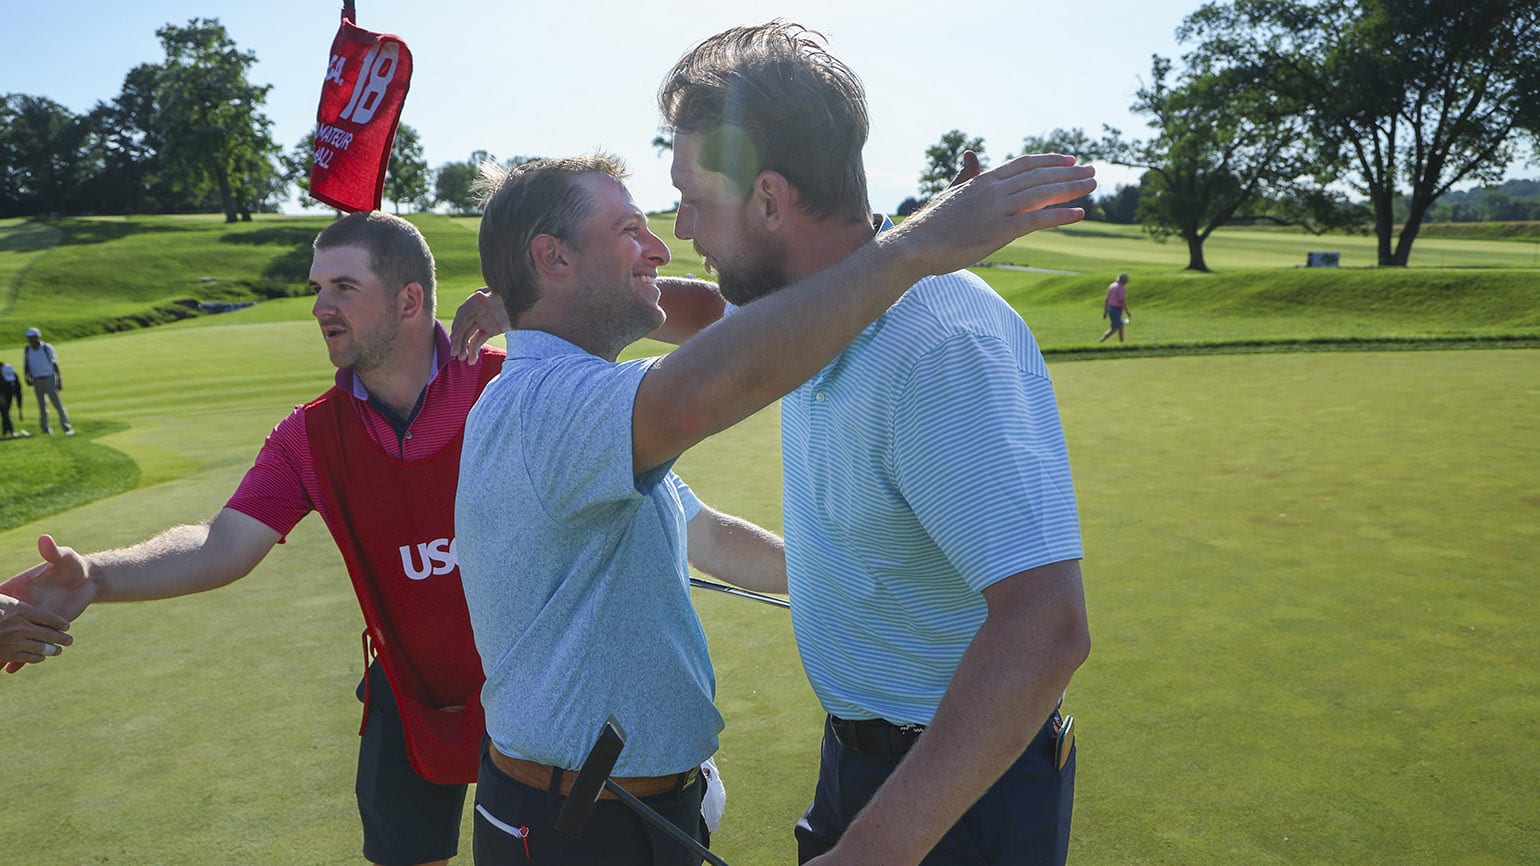 After failing to qualify for match play in their first two U.S. Amateur Four-Ball starts, Mike Smith (left) and Will Davenport find themselves in the semifinals of the 2024 edition at Philadelphia Cricket Club. (USGA/Jonathan Ernst)